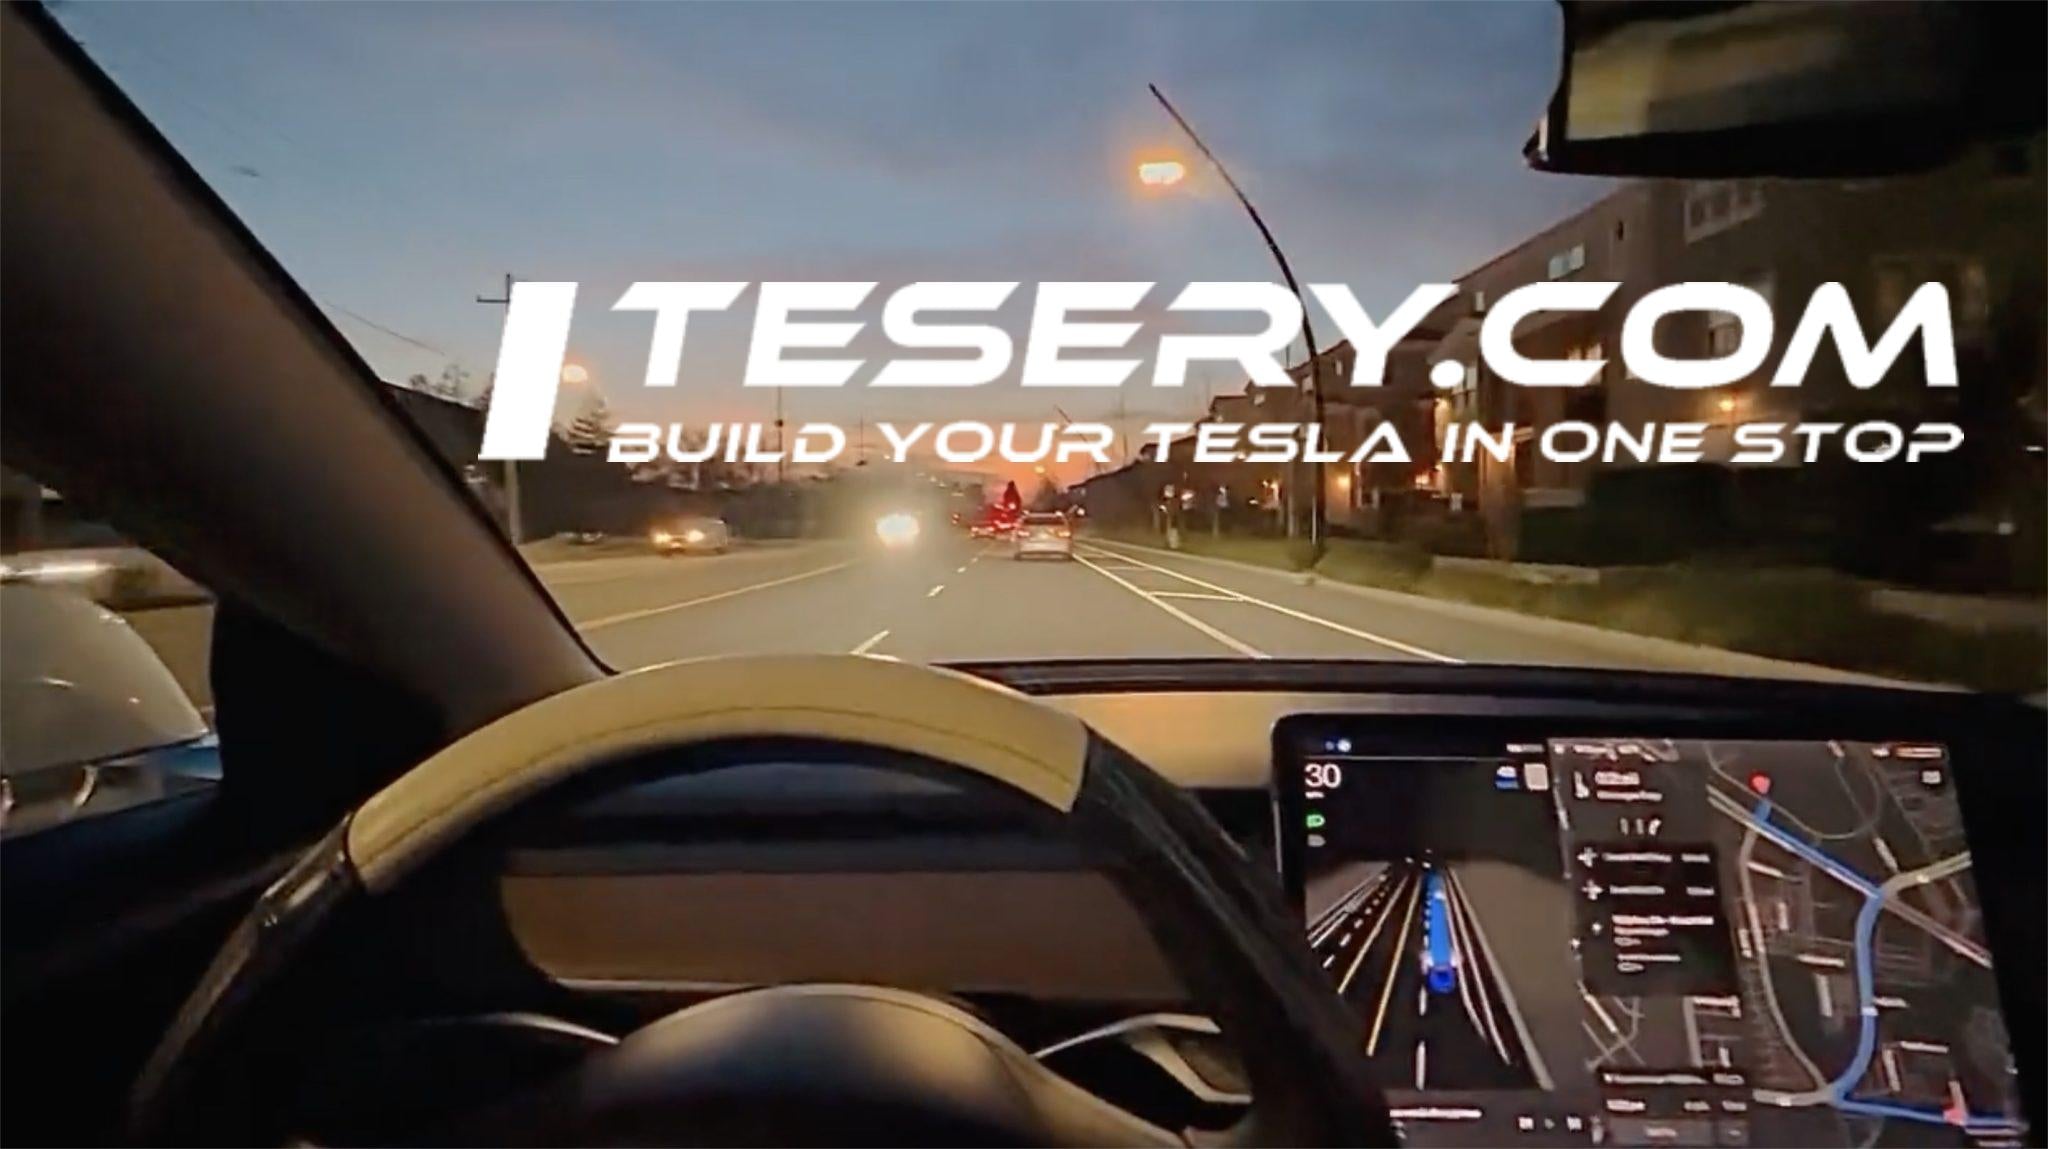 Tesla's FSD Beta 11.4.1 Unveiled: Architectural Enhancements and Future Autonomy - Tesery Official Store